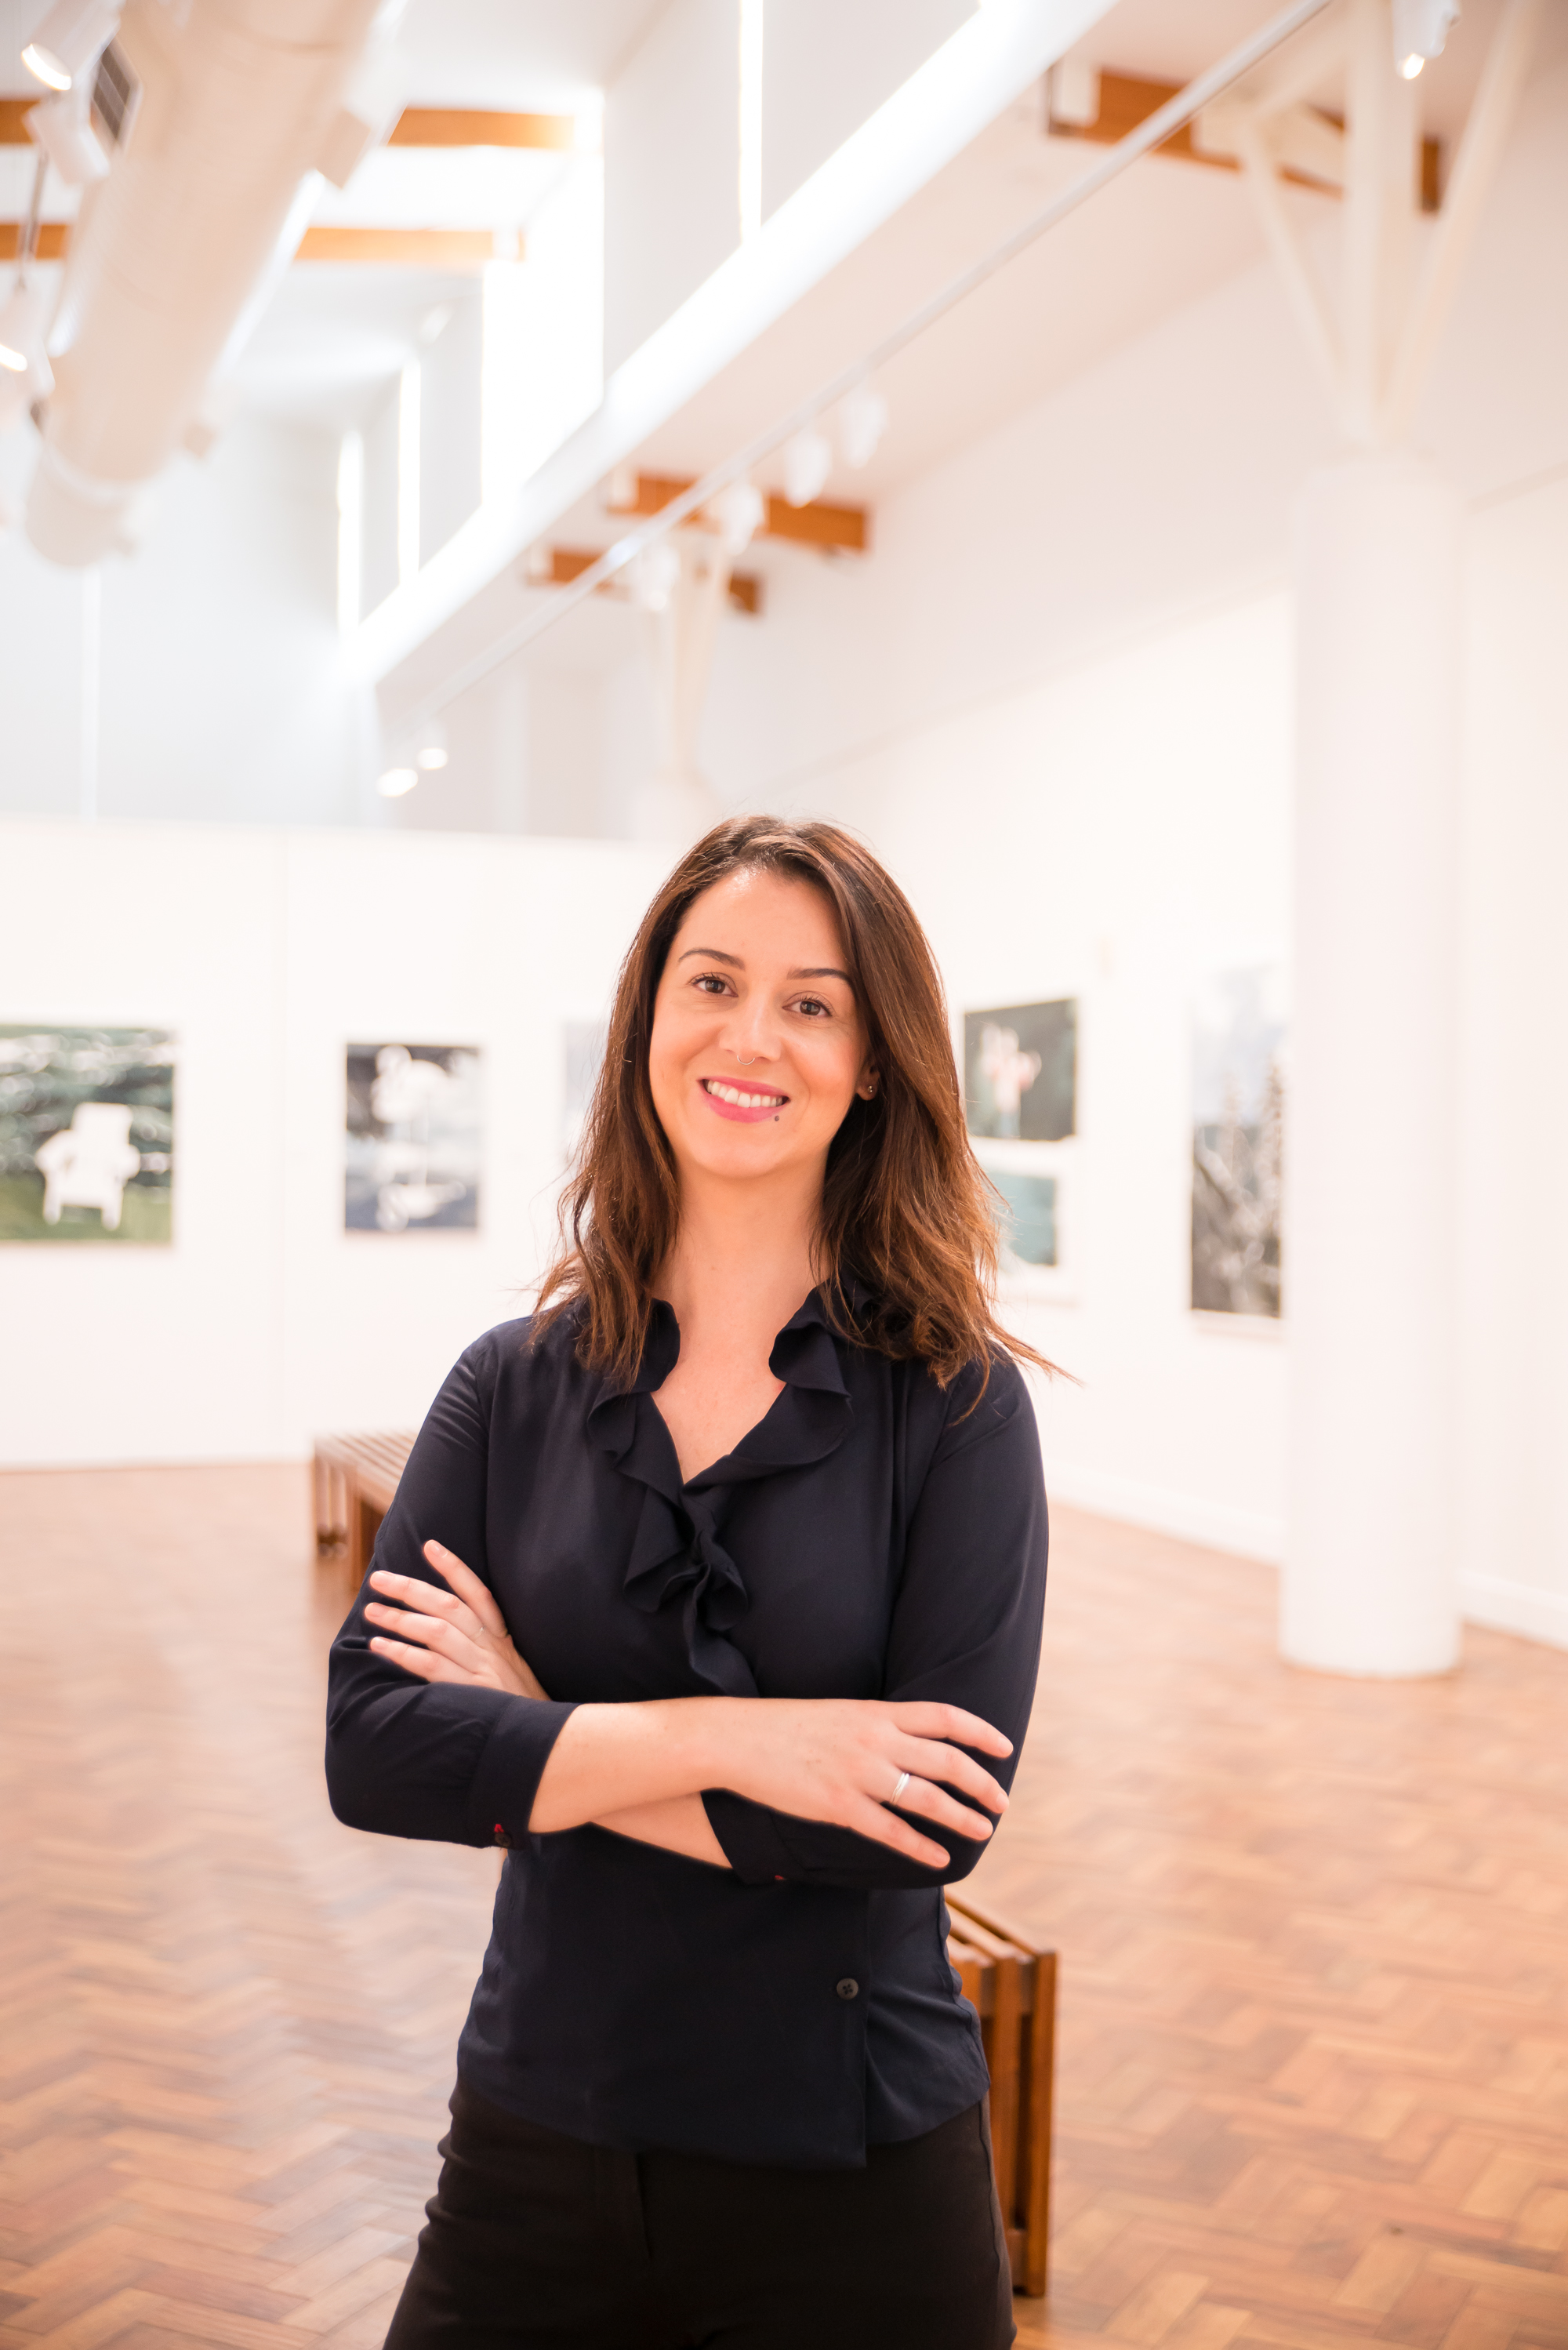 A 30-something woman with brown hair stands in a gallery space wearing all black. Paintings can be seen on the walls behind her.